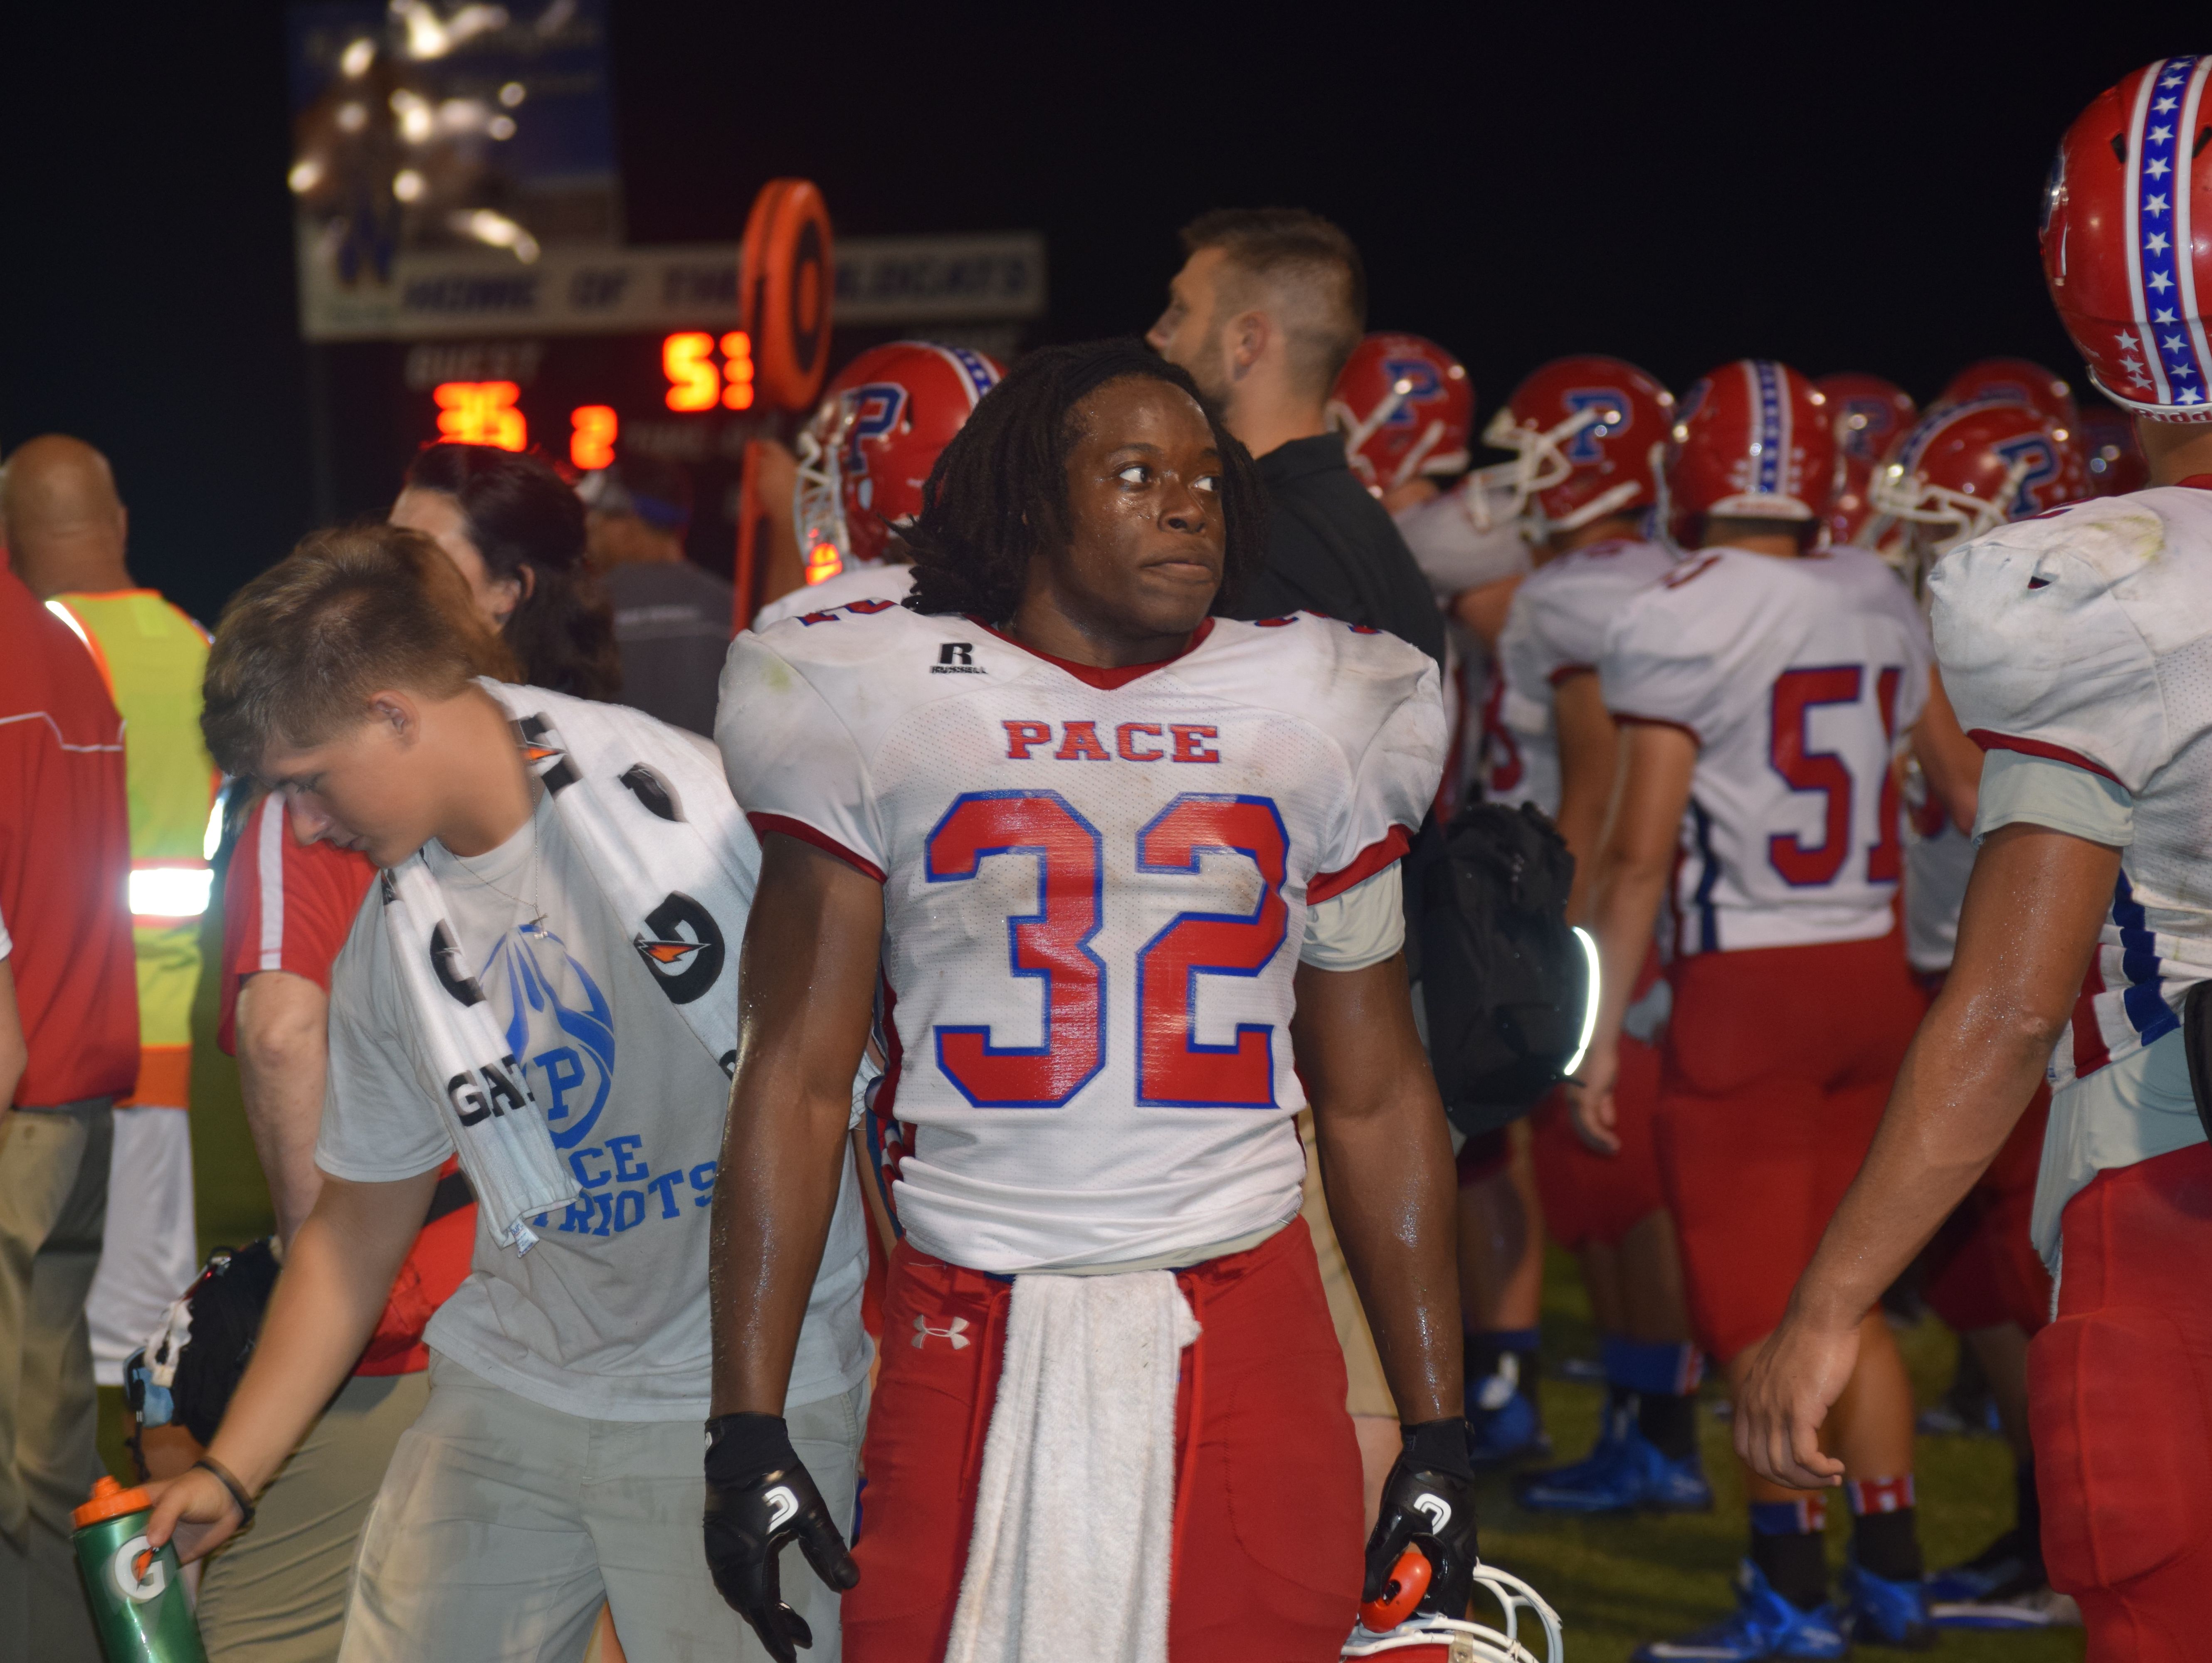 Pace High senior Anthony Johnson rushed for 170 yards and three touchdowns in the Patriots win against Washington.